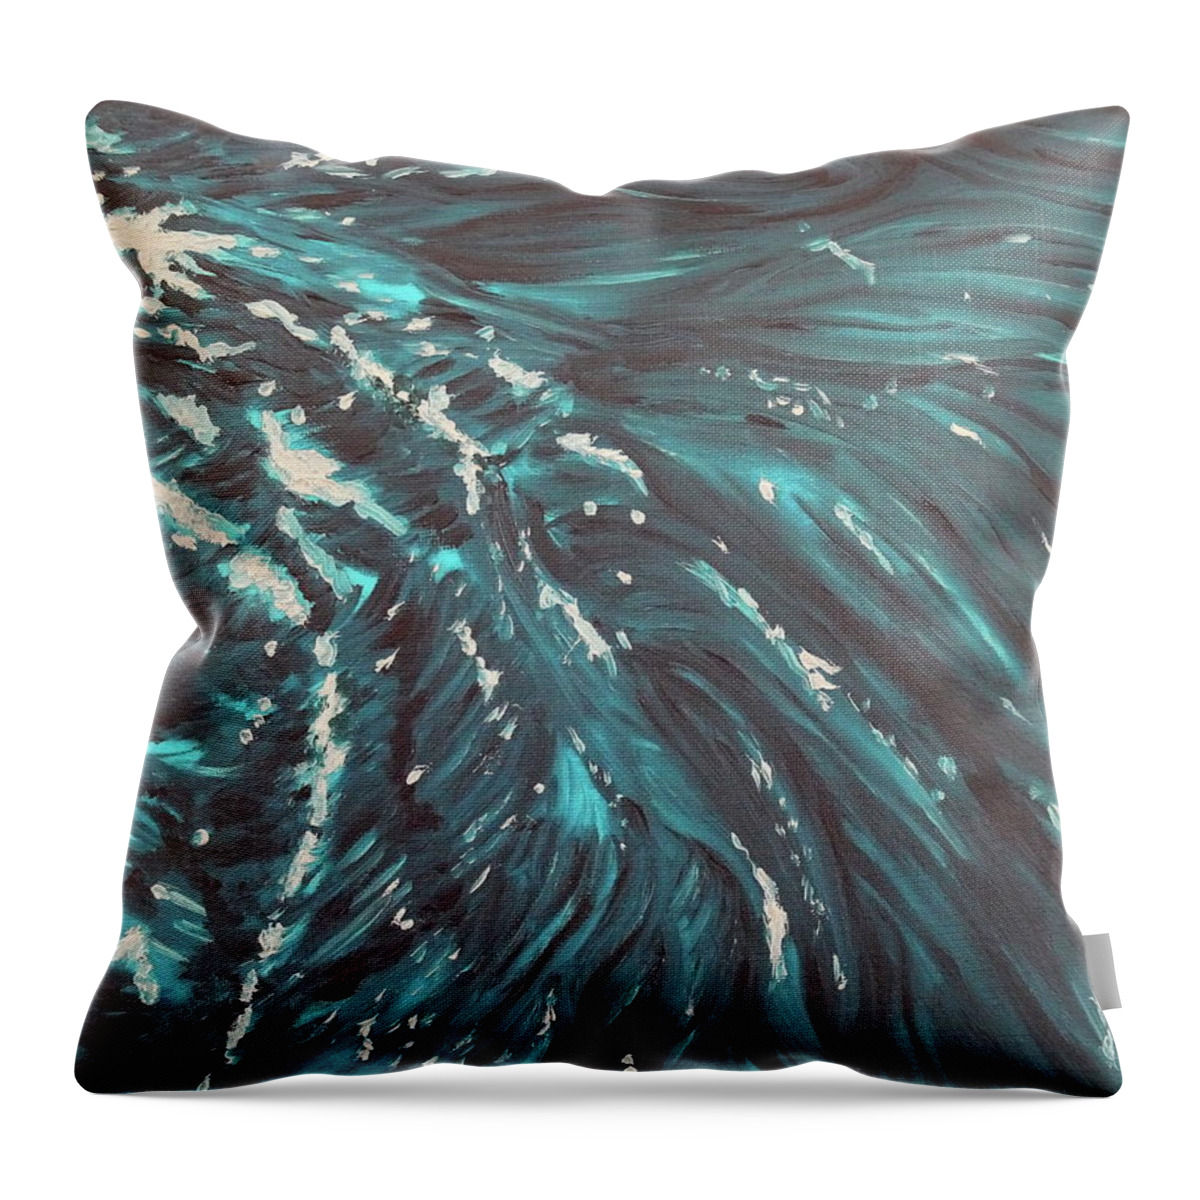 Water Throw Pillow featuring the painting Waves - Turquoise by Neslihan Ergul Colley